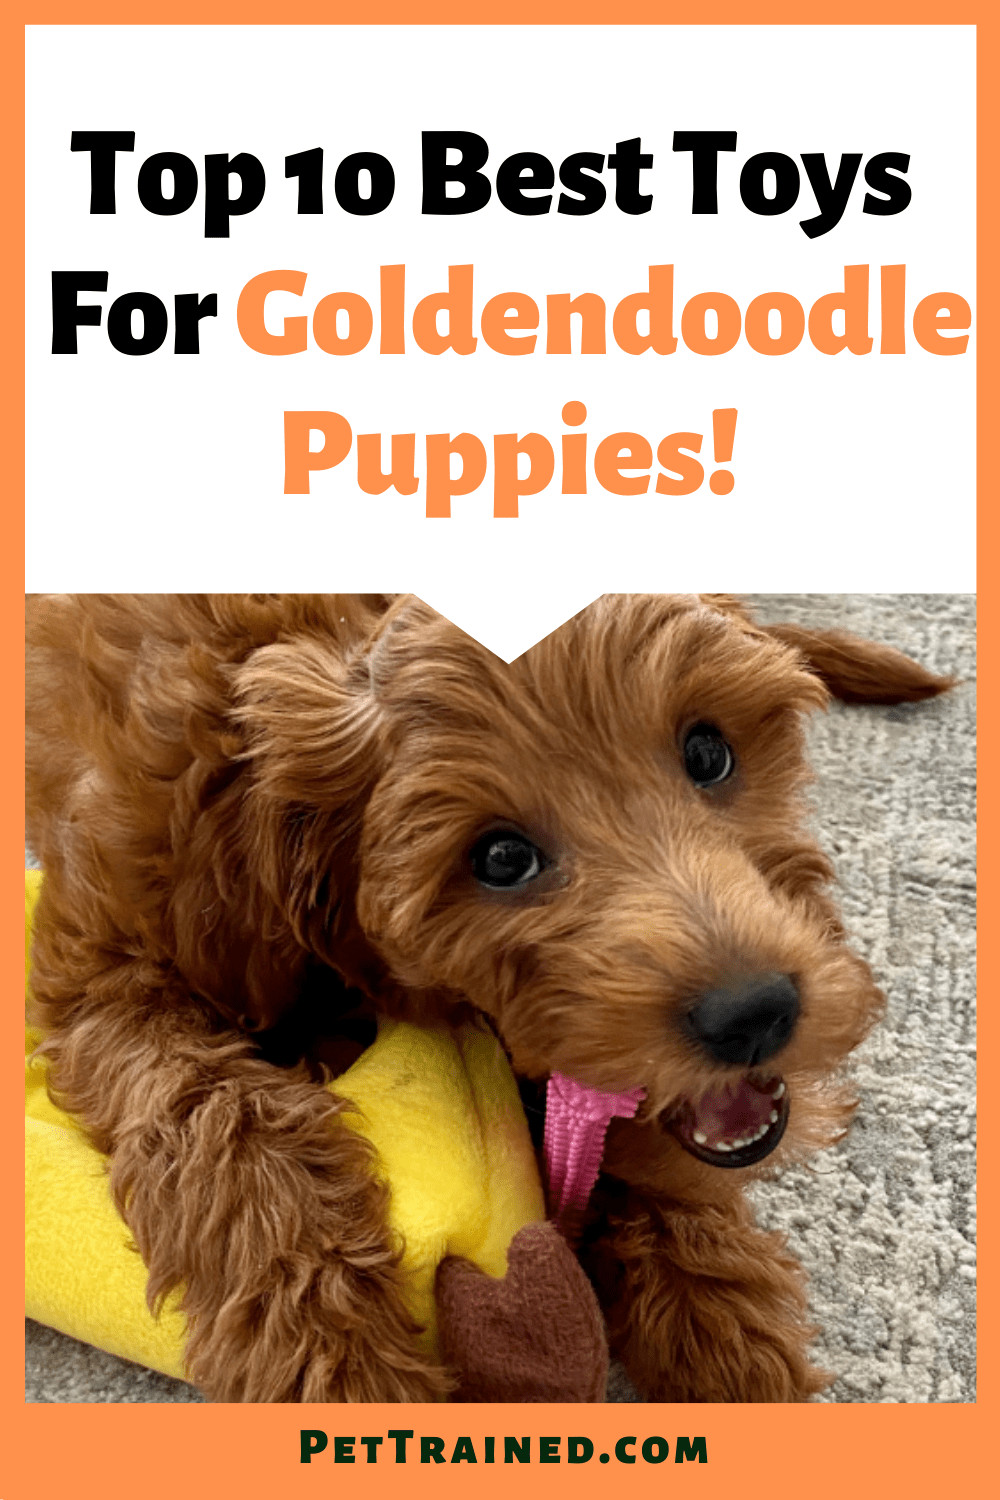 Top 10 Best Toys For Goldendoodle Puppies and dogs